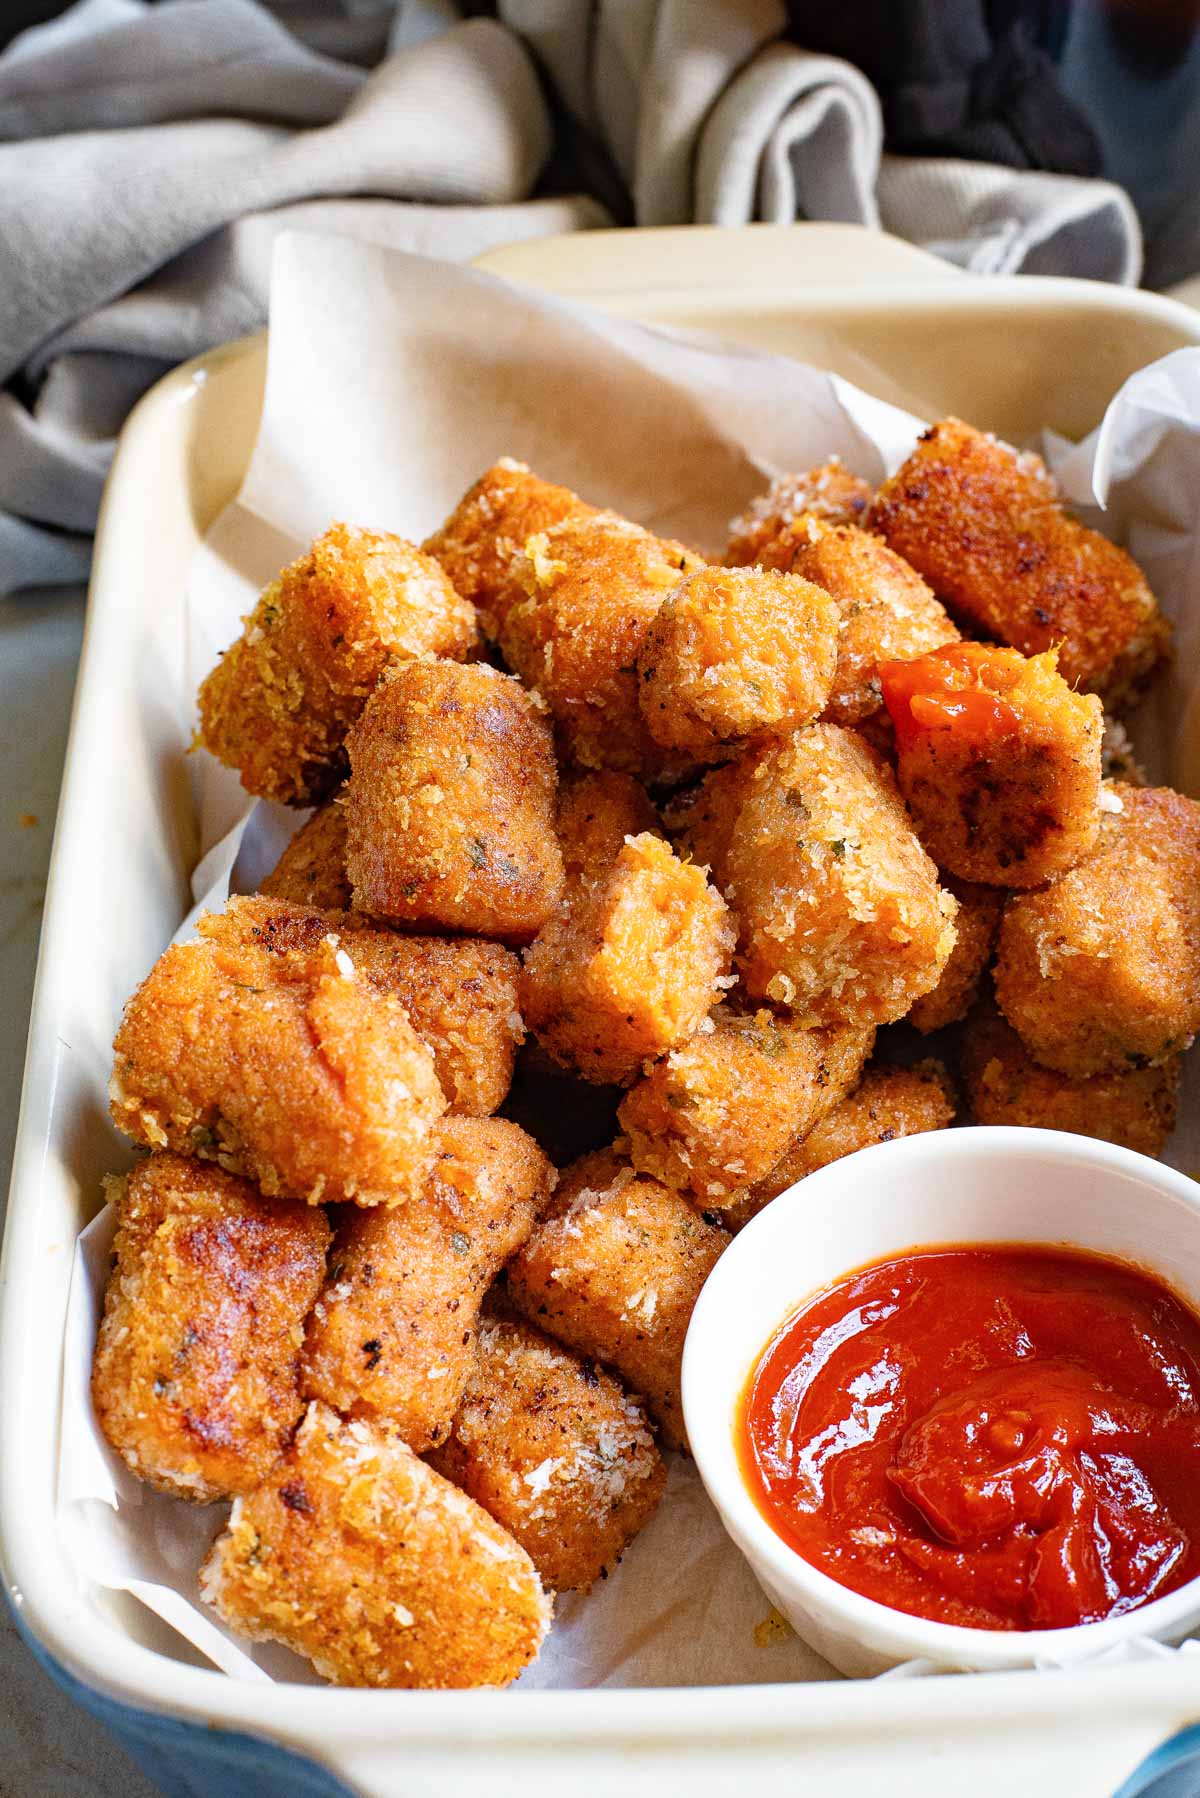 the completed sweet potato tater tots recipe served with dipping sauce